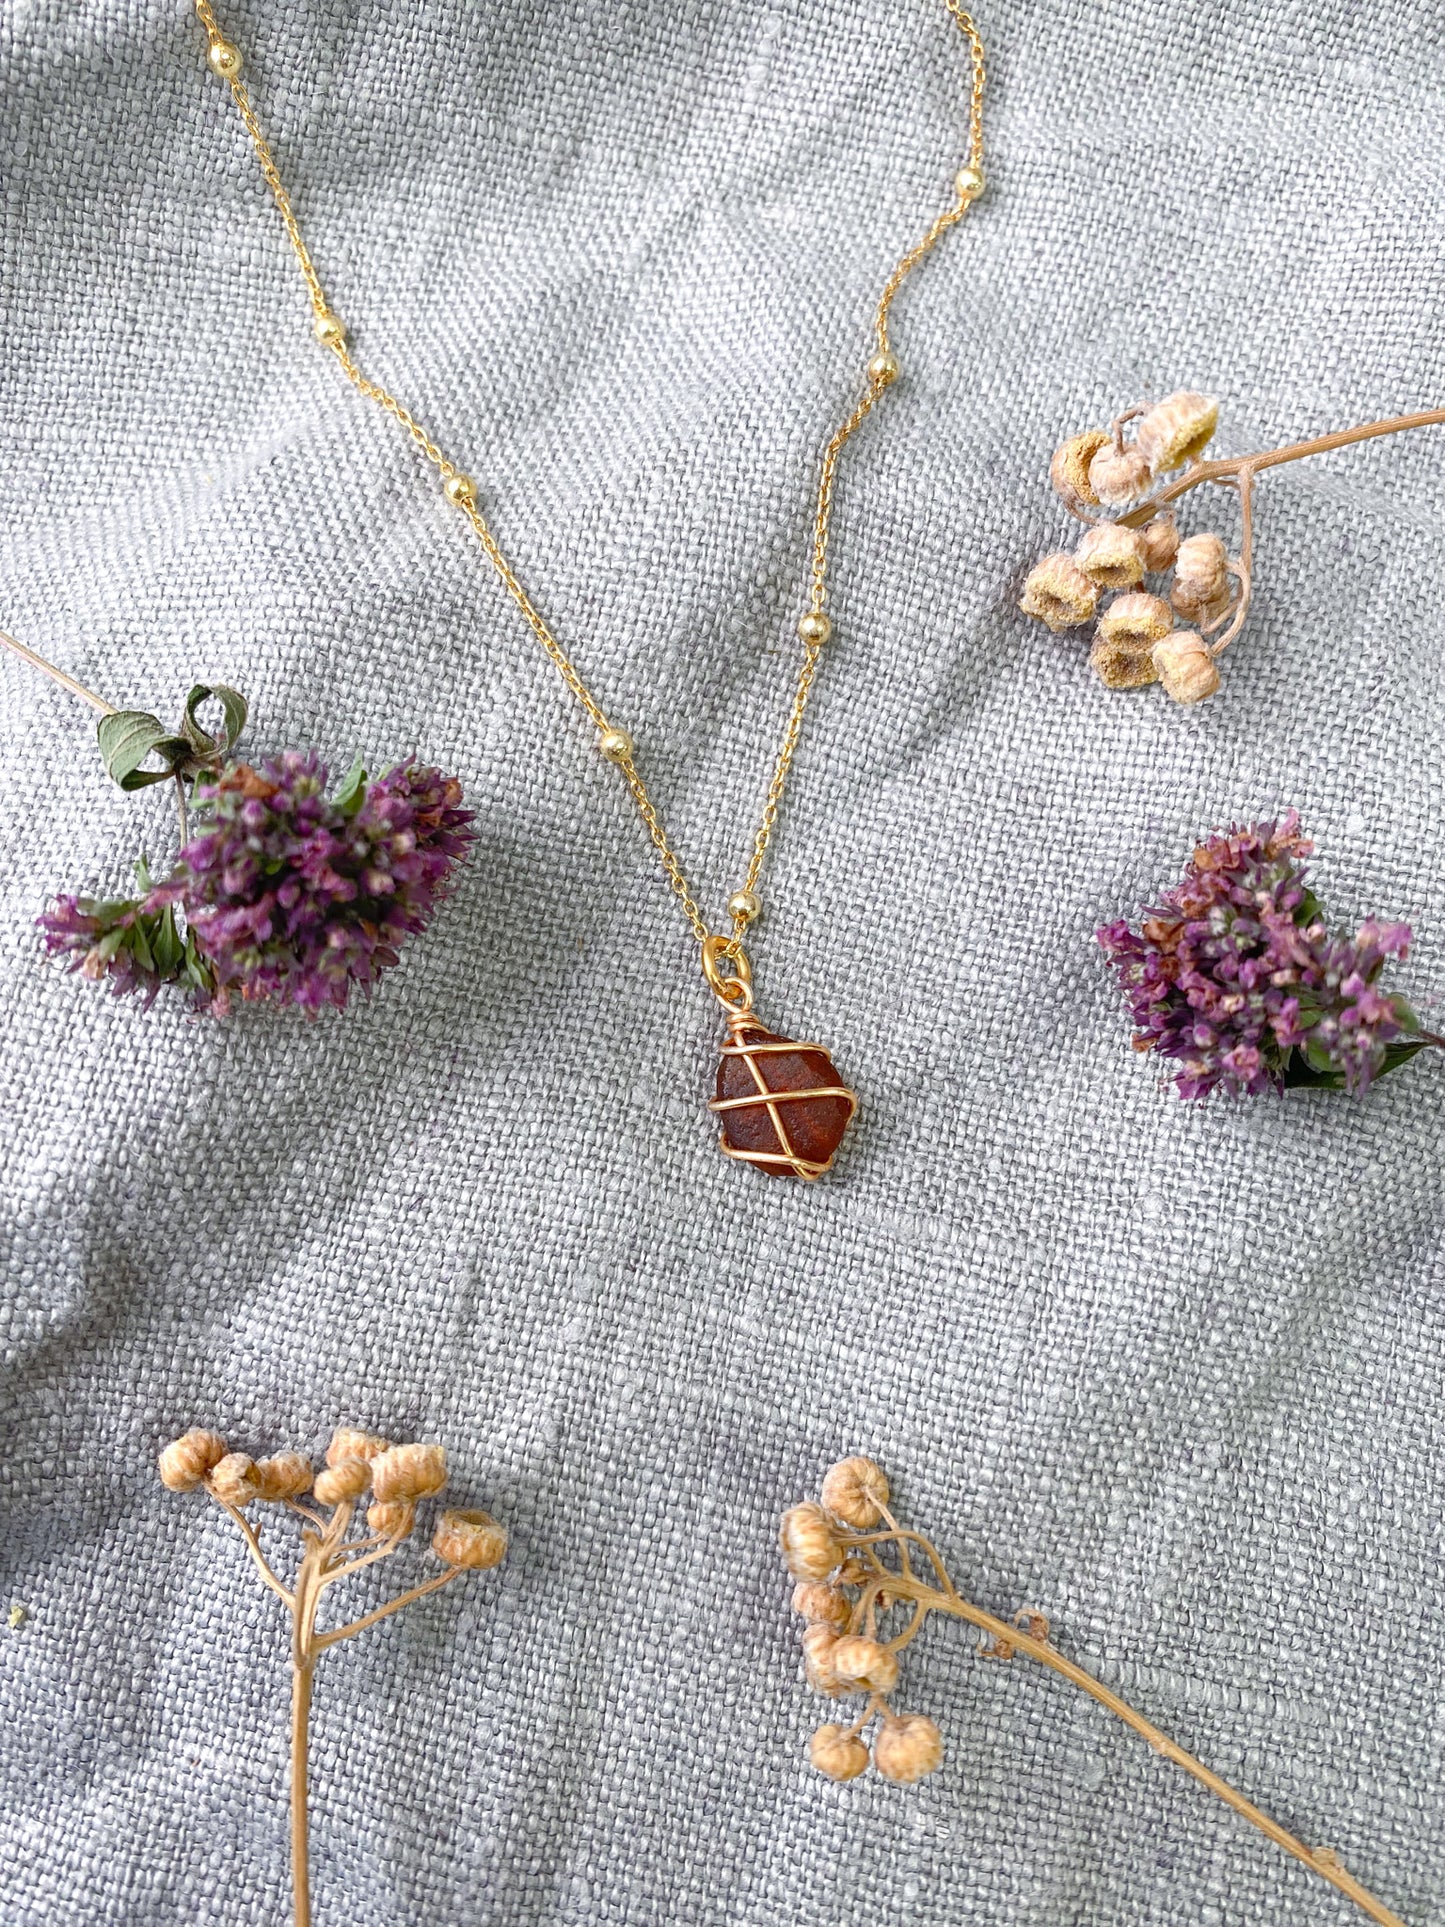 Eleanor Necklace in Gold & Amber